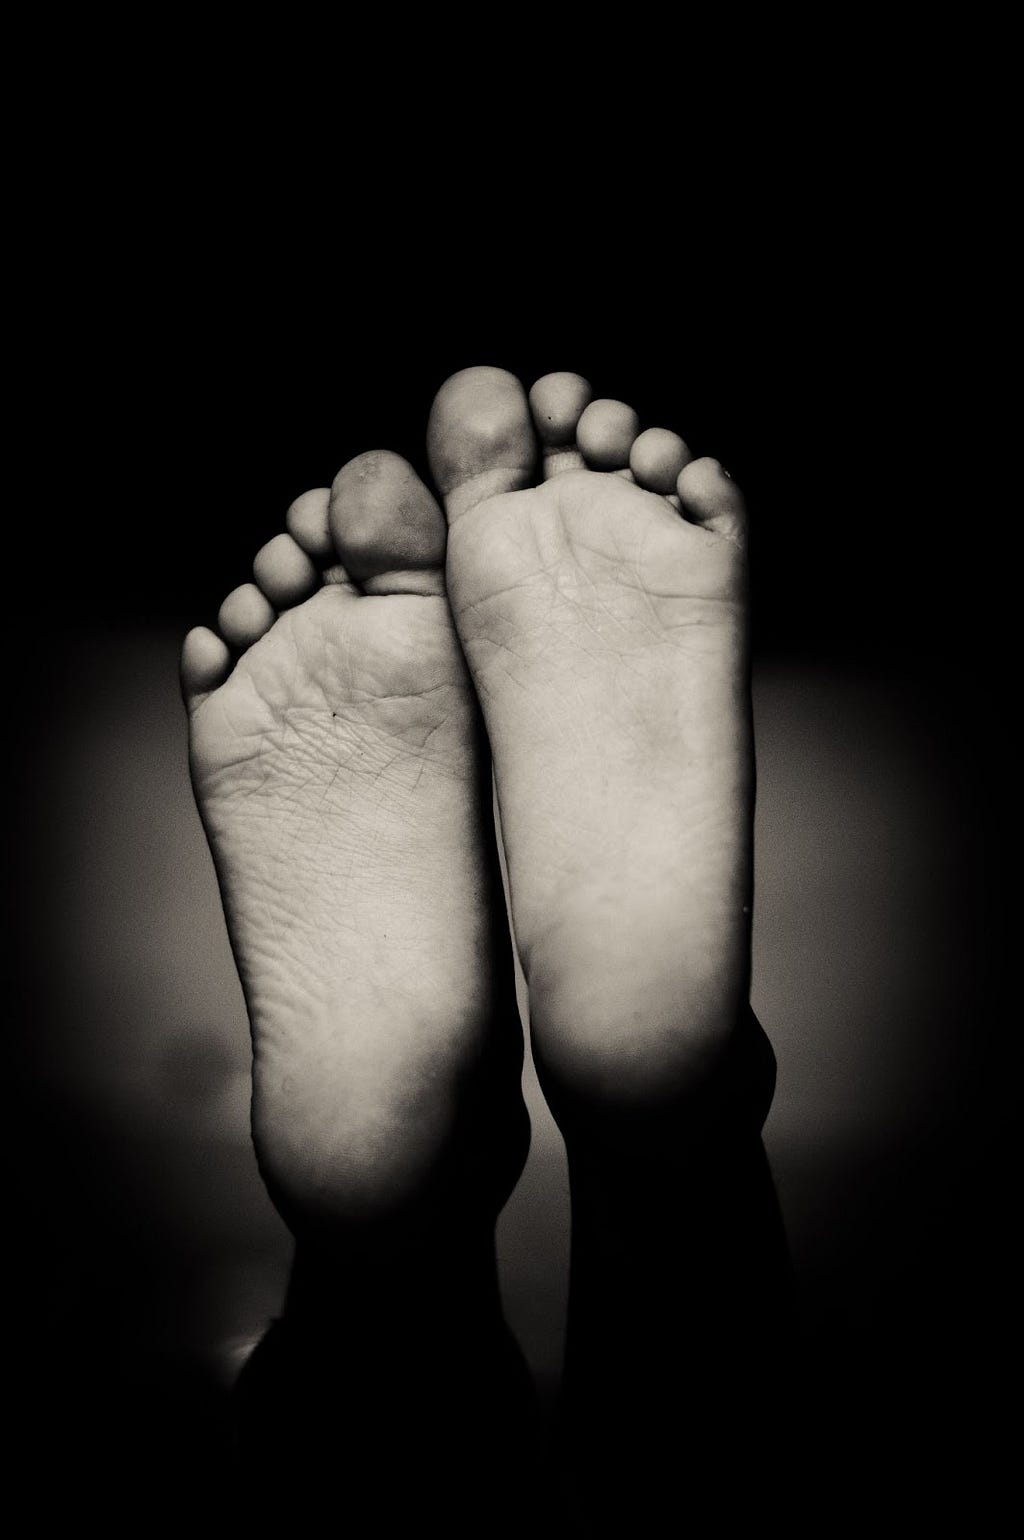 A black and white image of feet soles.